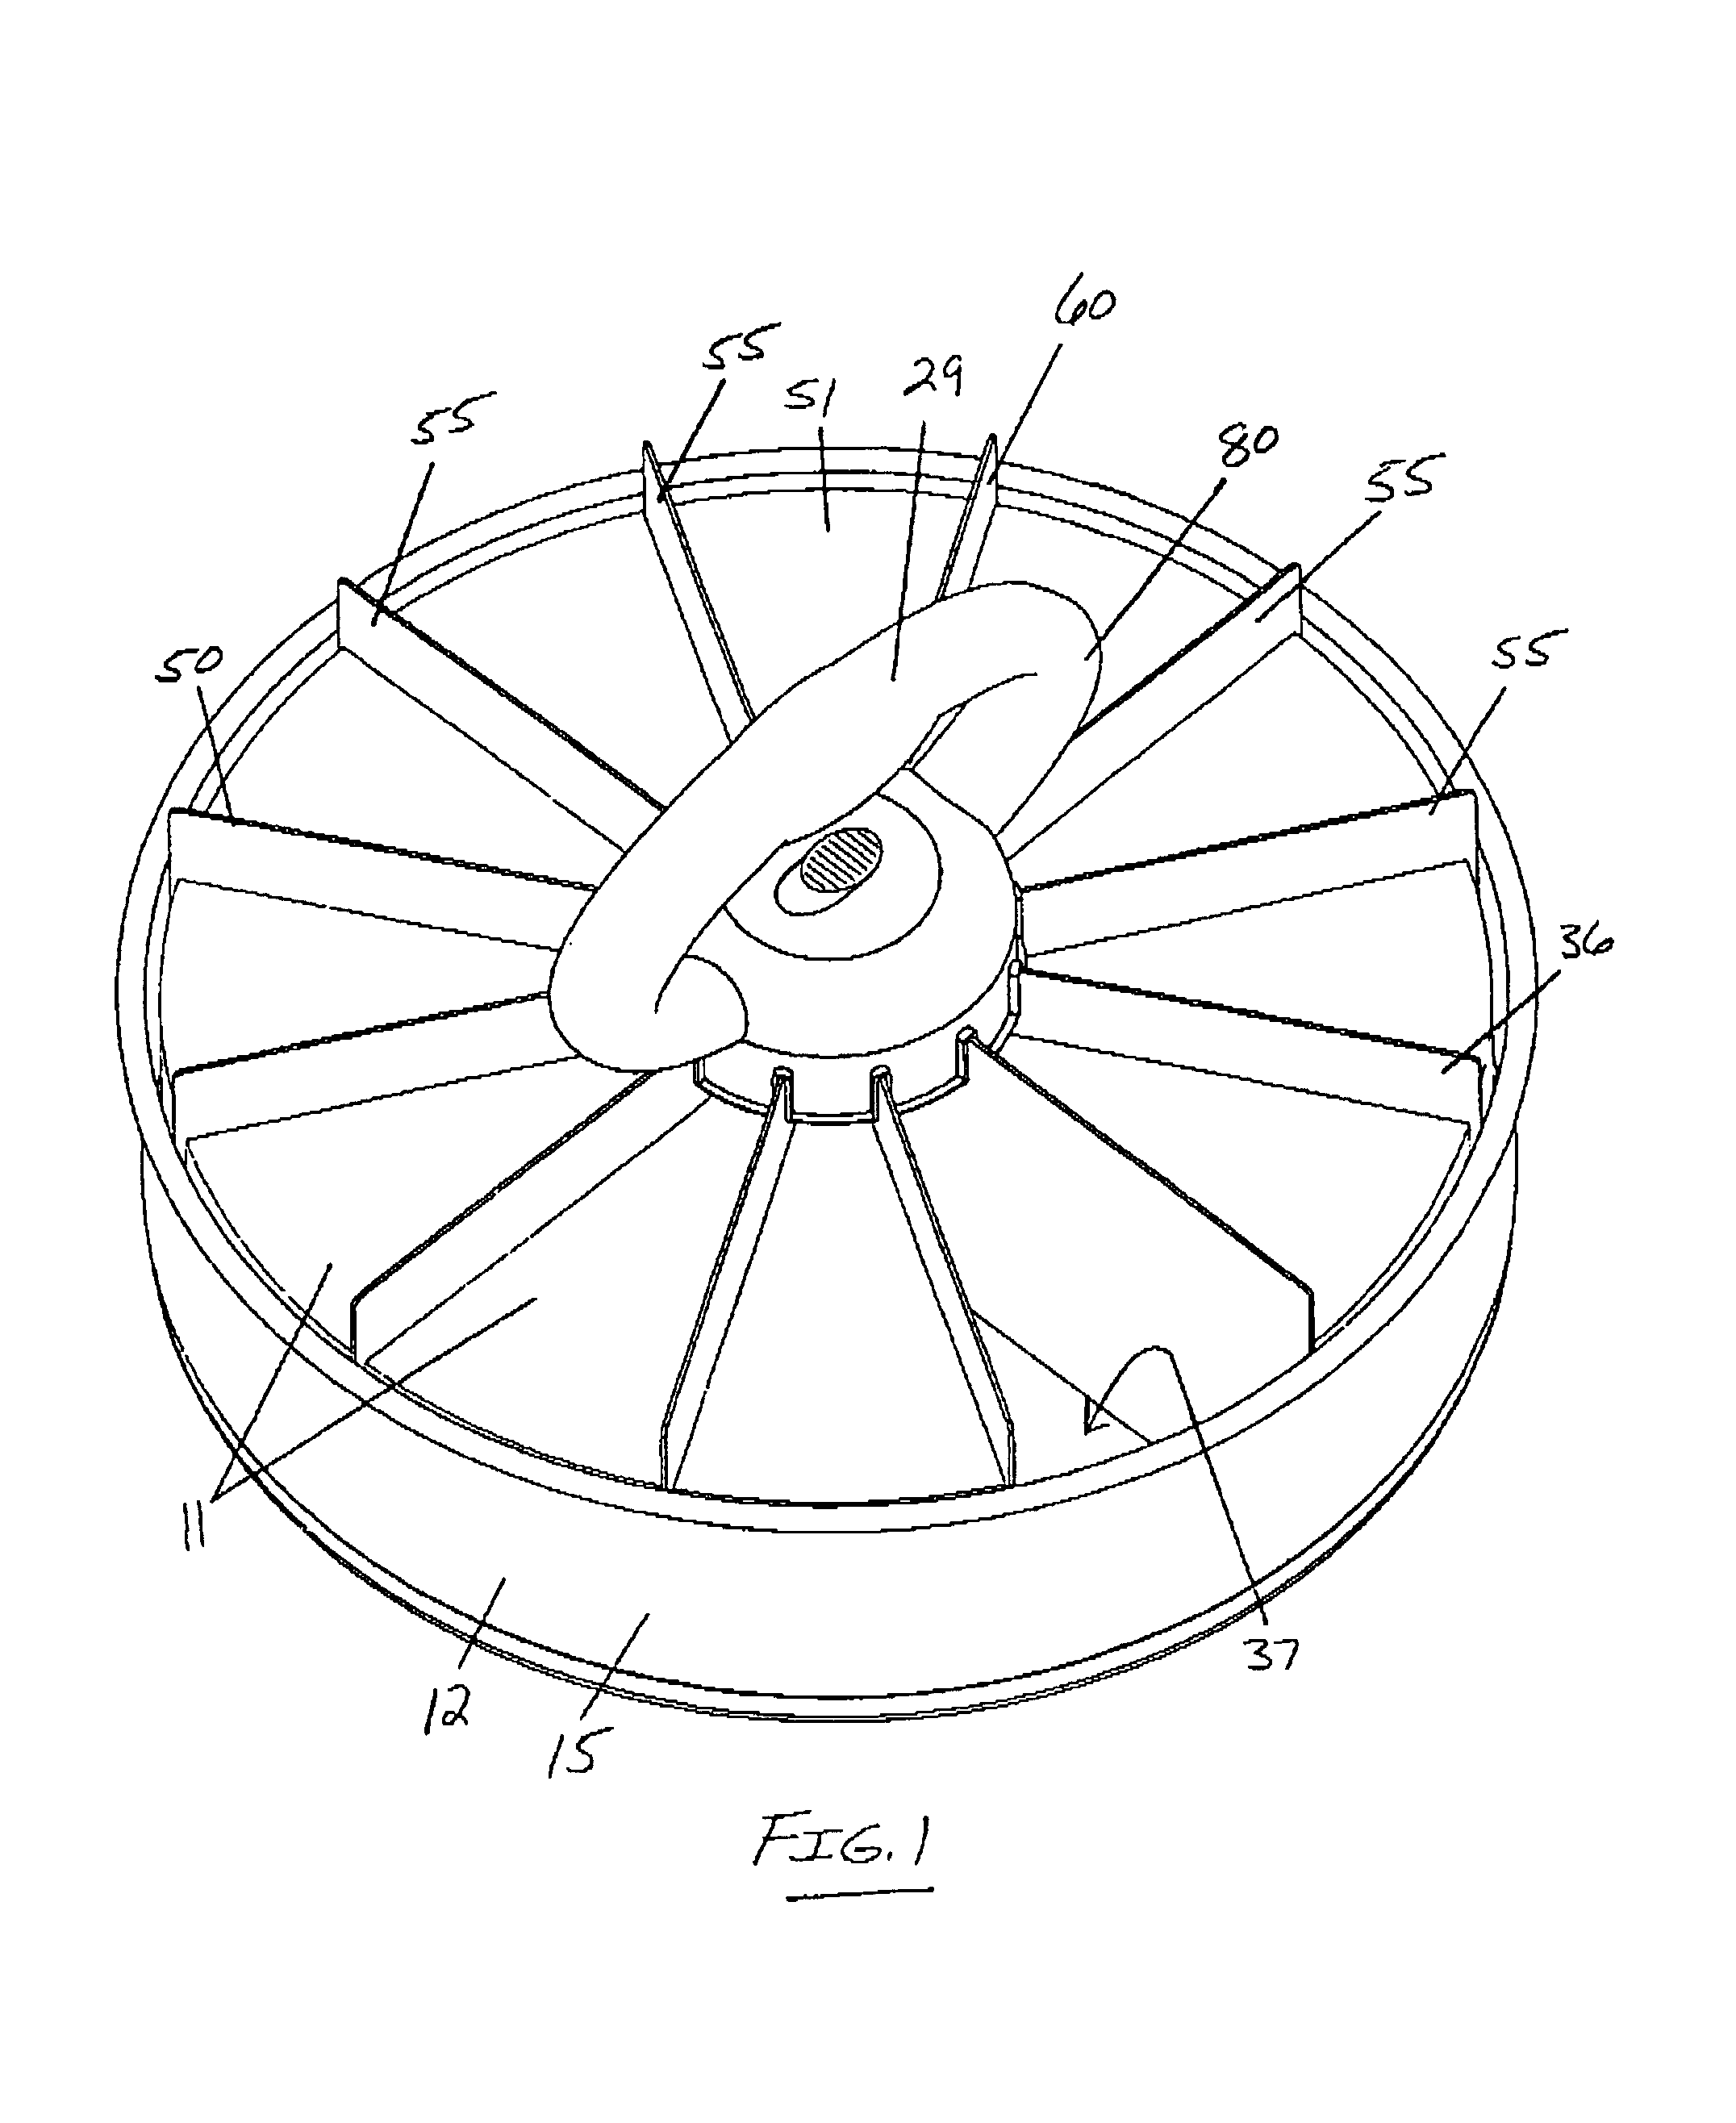 Food presentation system and assembly therefor